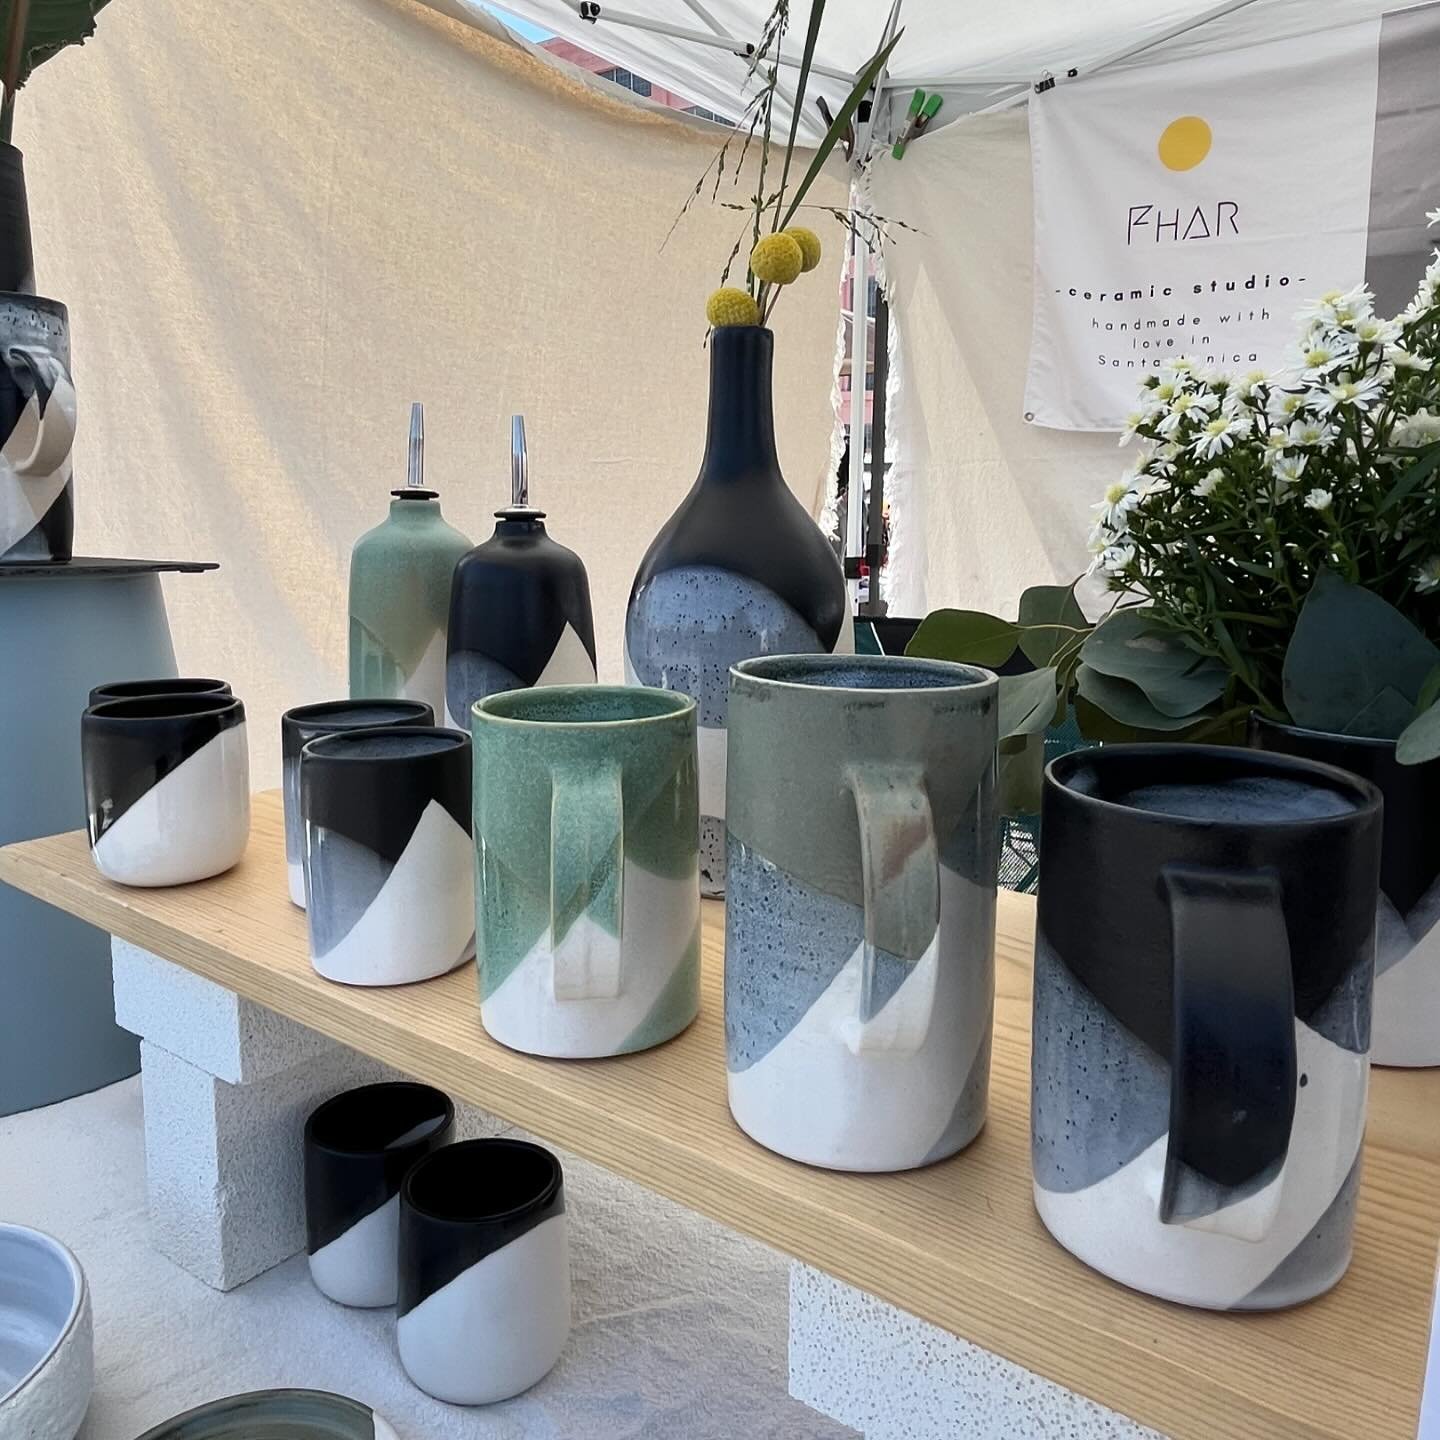 - West Coast Craft -
Here are some views of my setup today. The weather is amazing and there are so many talented artists today ! 
.
.
.
.
.
.
#westcoastcraft #craftmarketsetup #marketsetup #contemporaryceramics #potterylove #ceramicart #instapottery